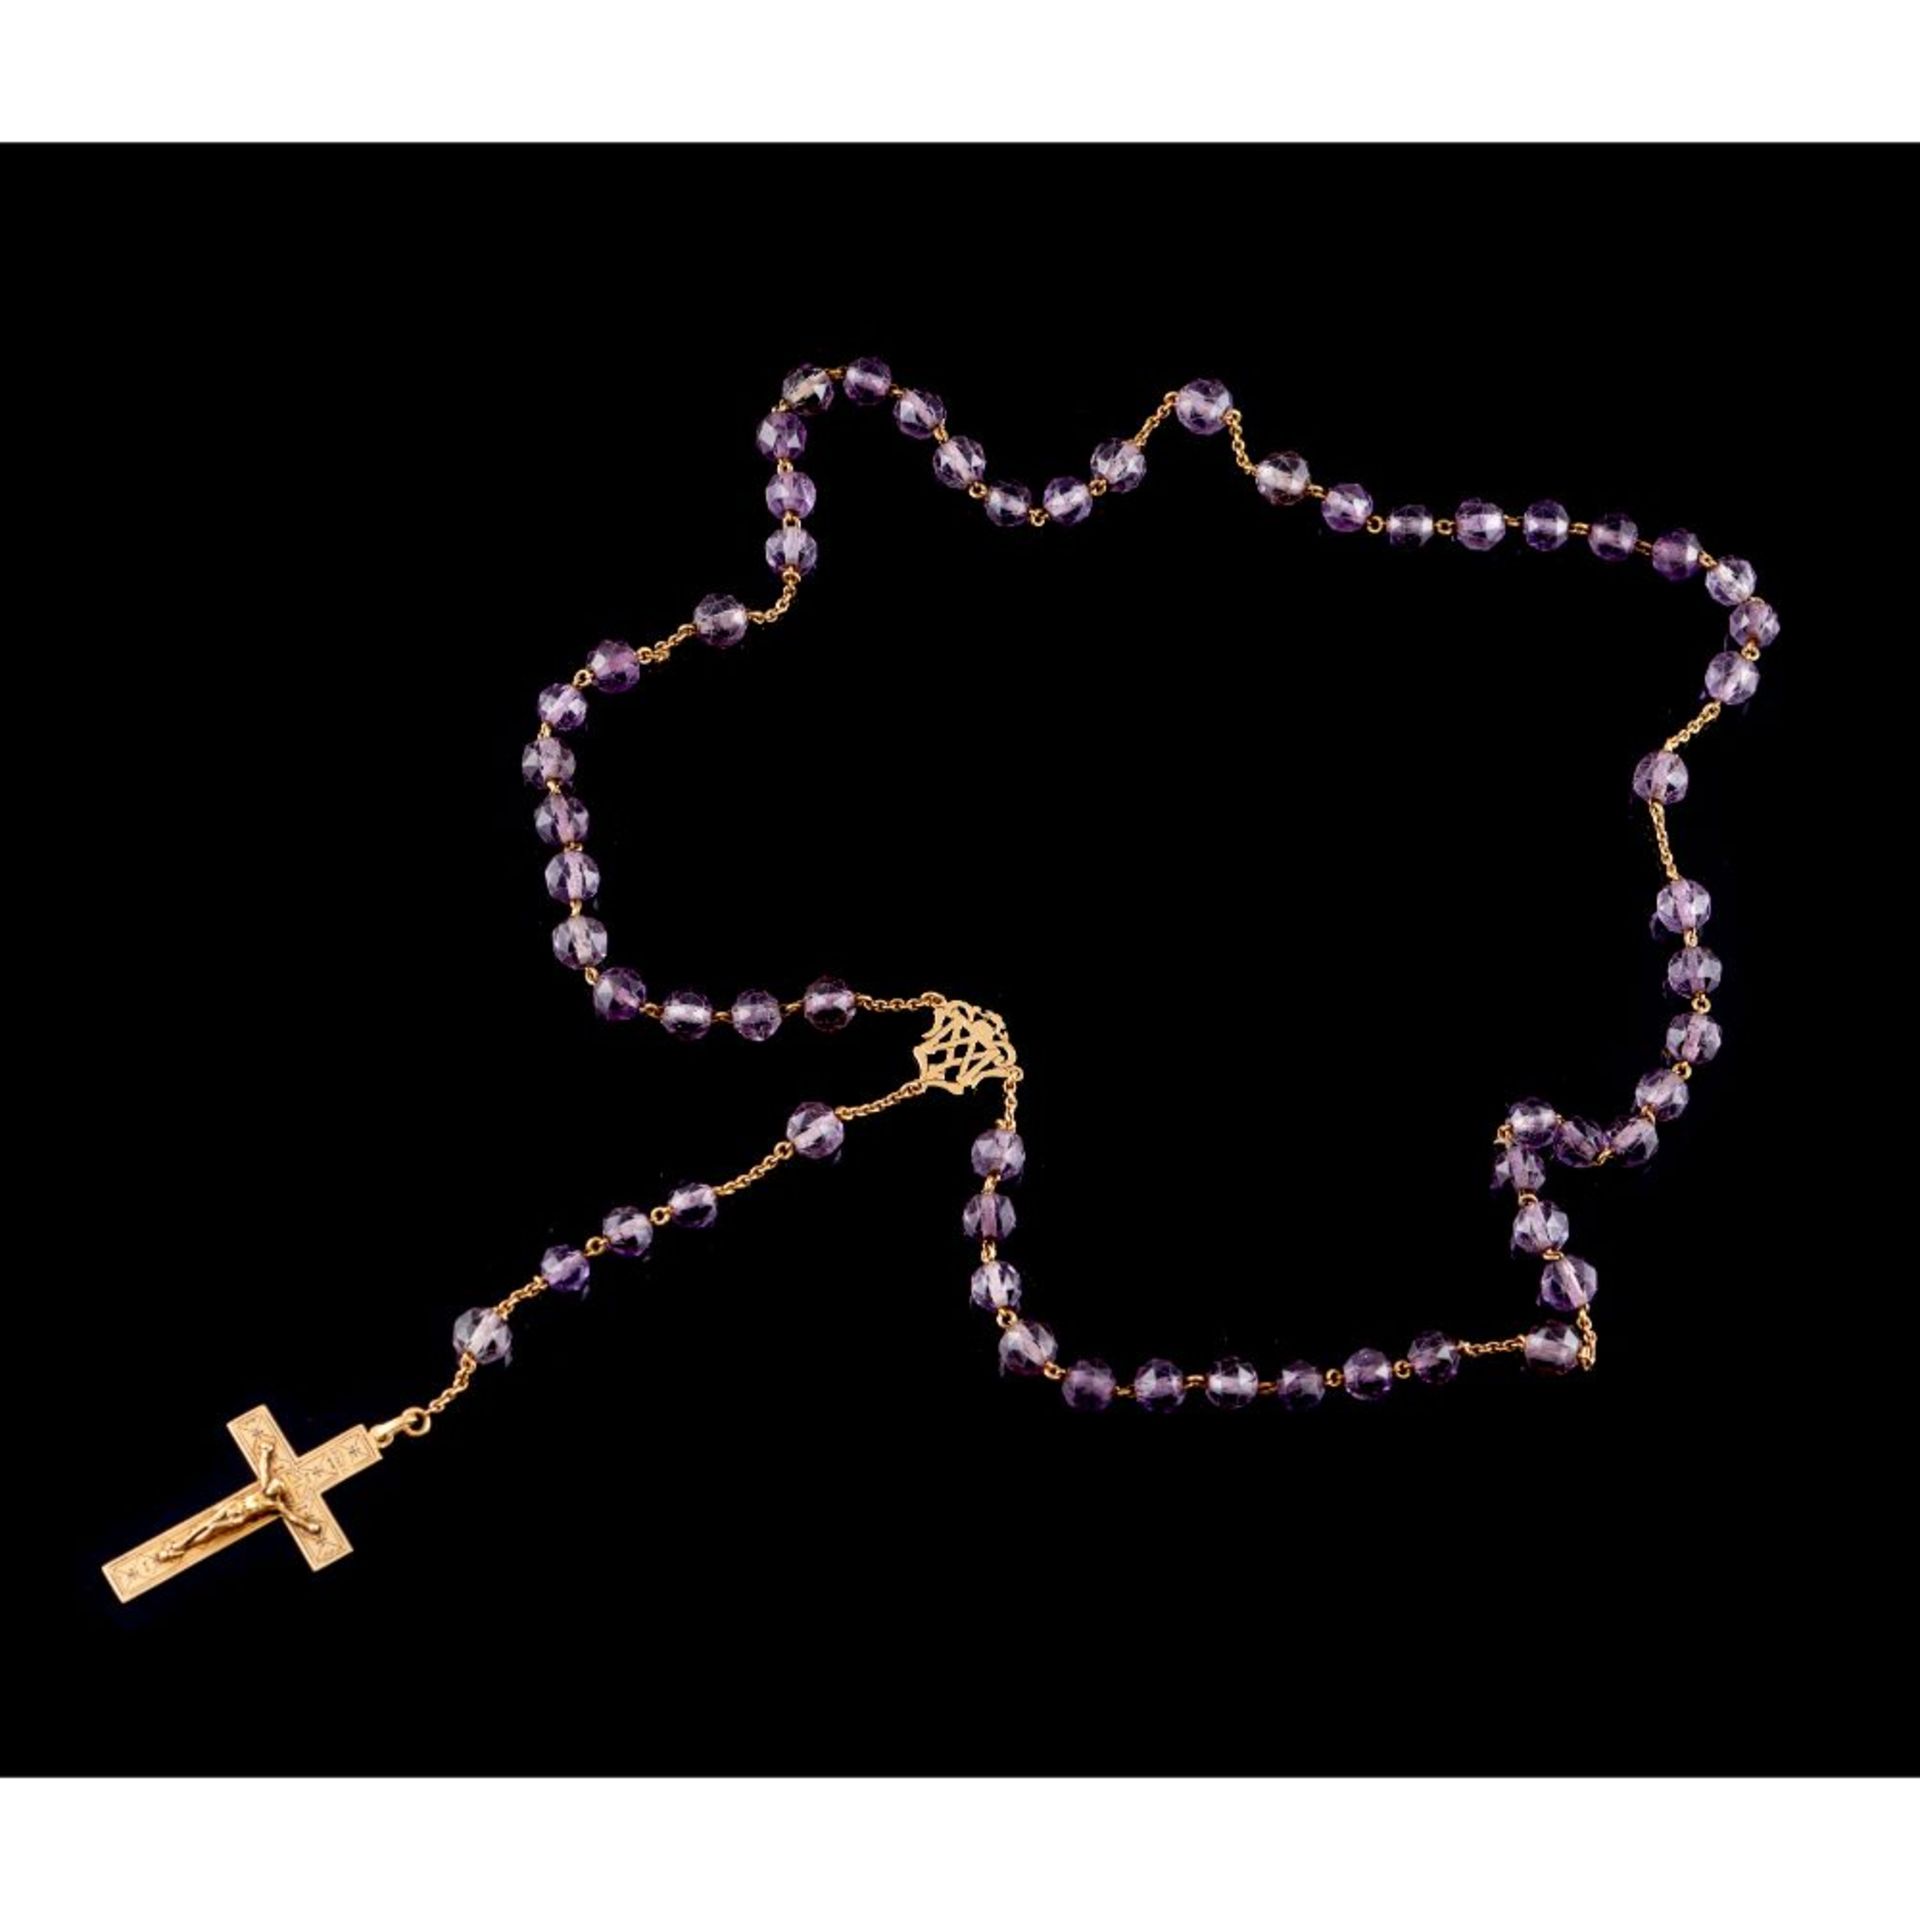 A Rosary, Gold 800/000, Interspersed with faceted amethyst beads, Oporto hallmark (1938-1984) and